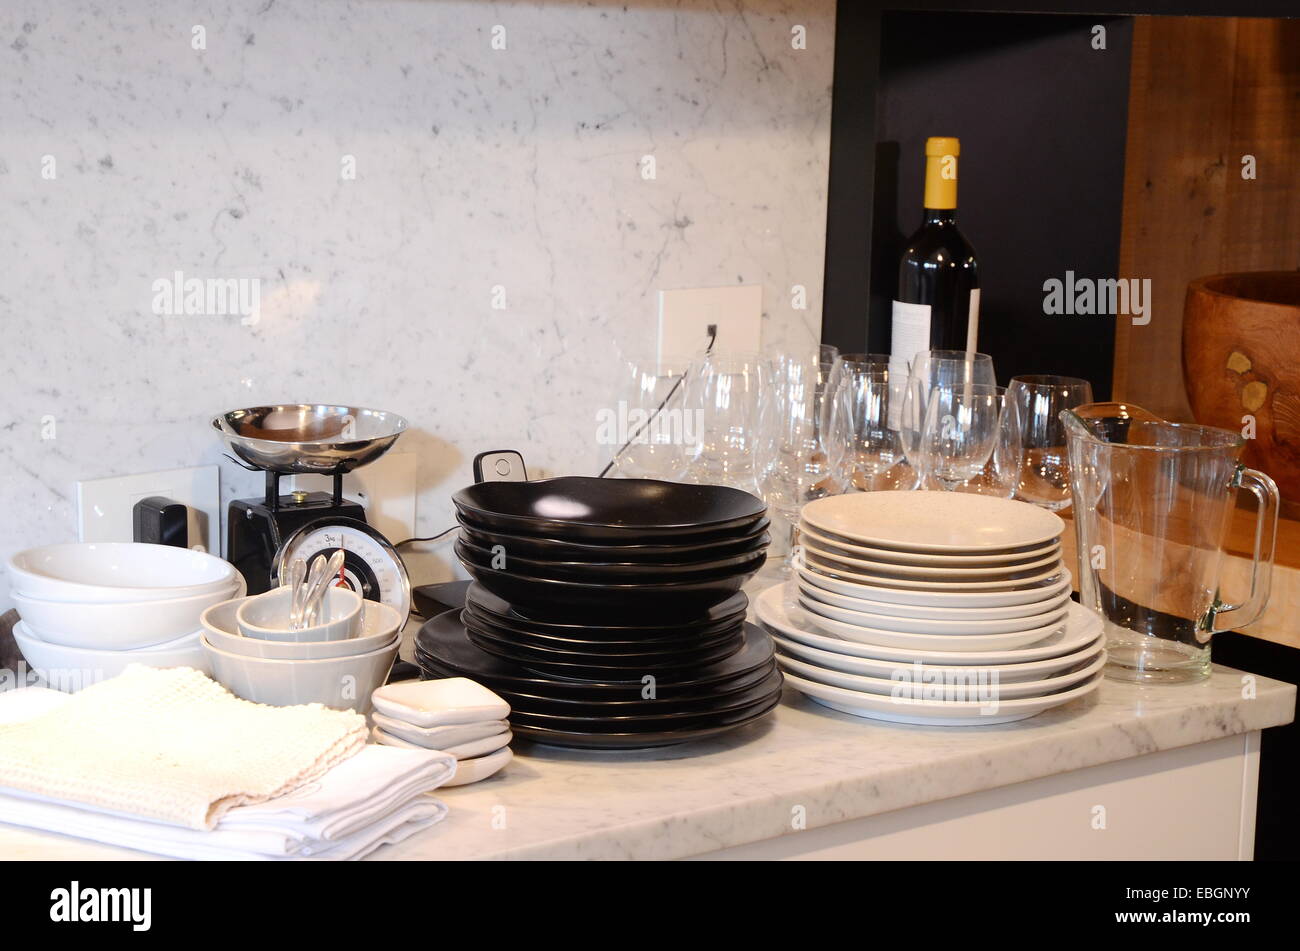 Clean tableware in kitchen ready for setting a dinner table Stock Photo